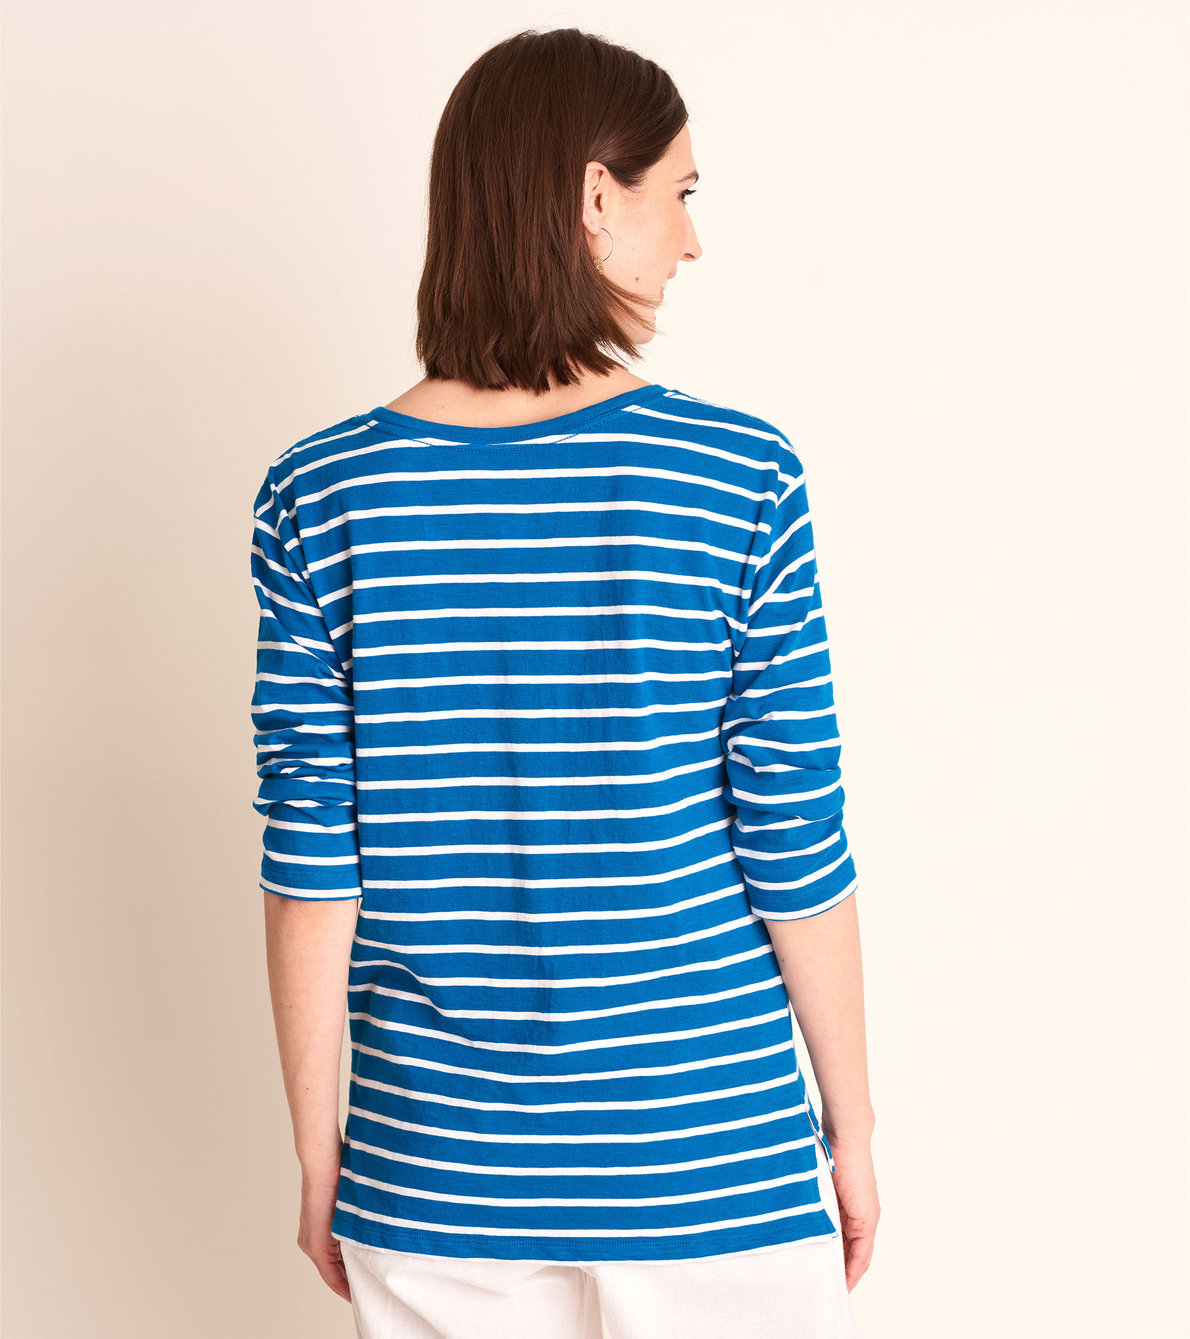 View larger image of Hatley 3/4 Sleeve Tee - Mykonos Blue Stripes